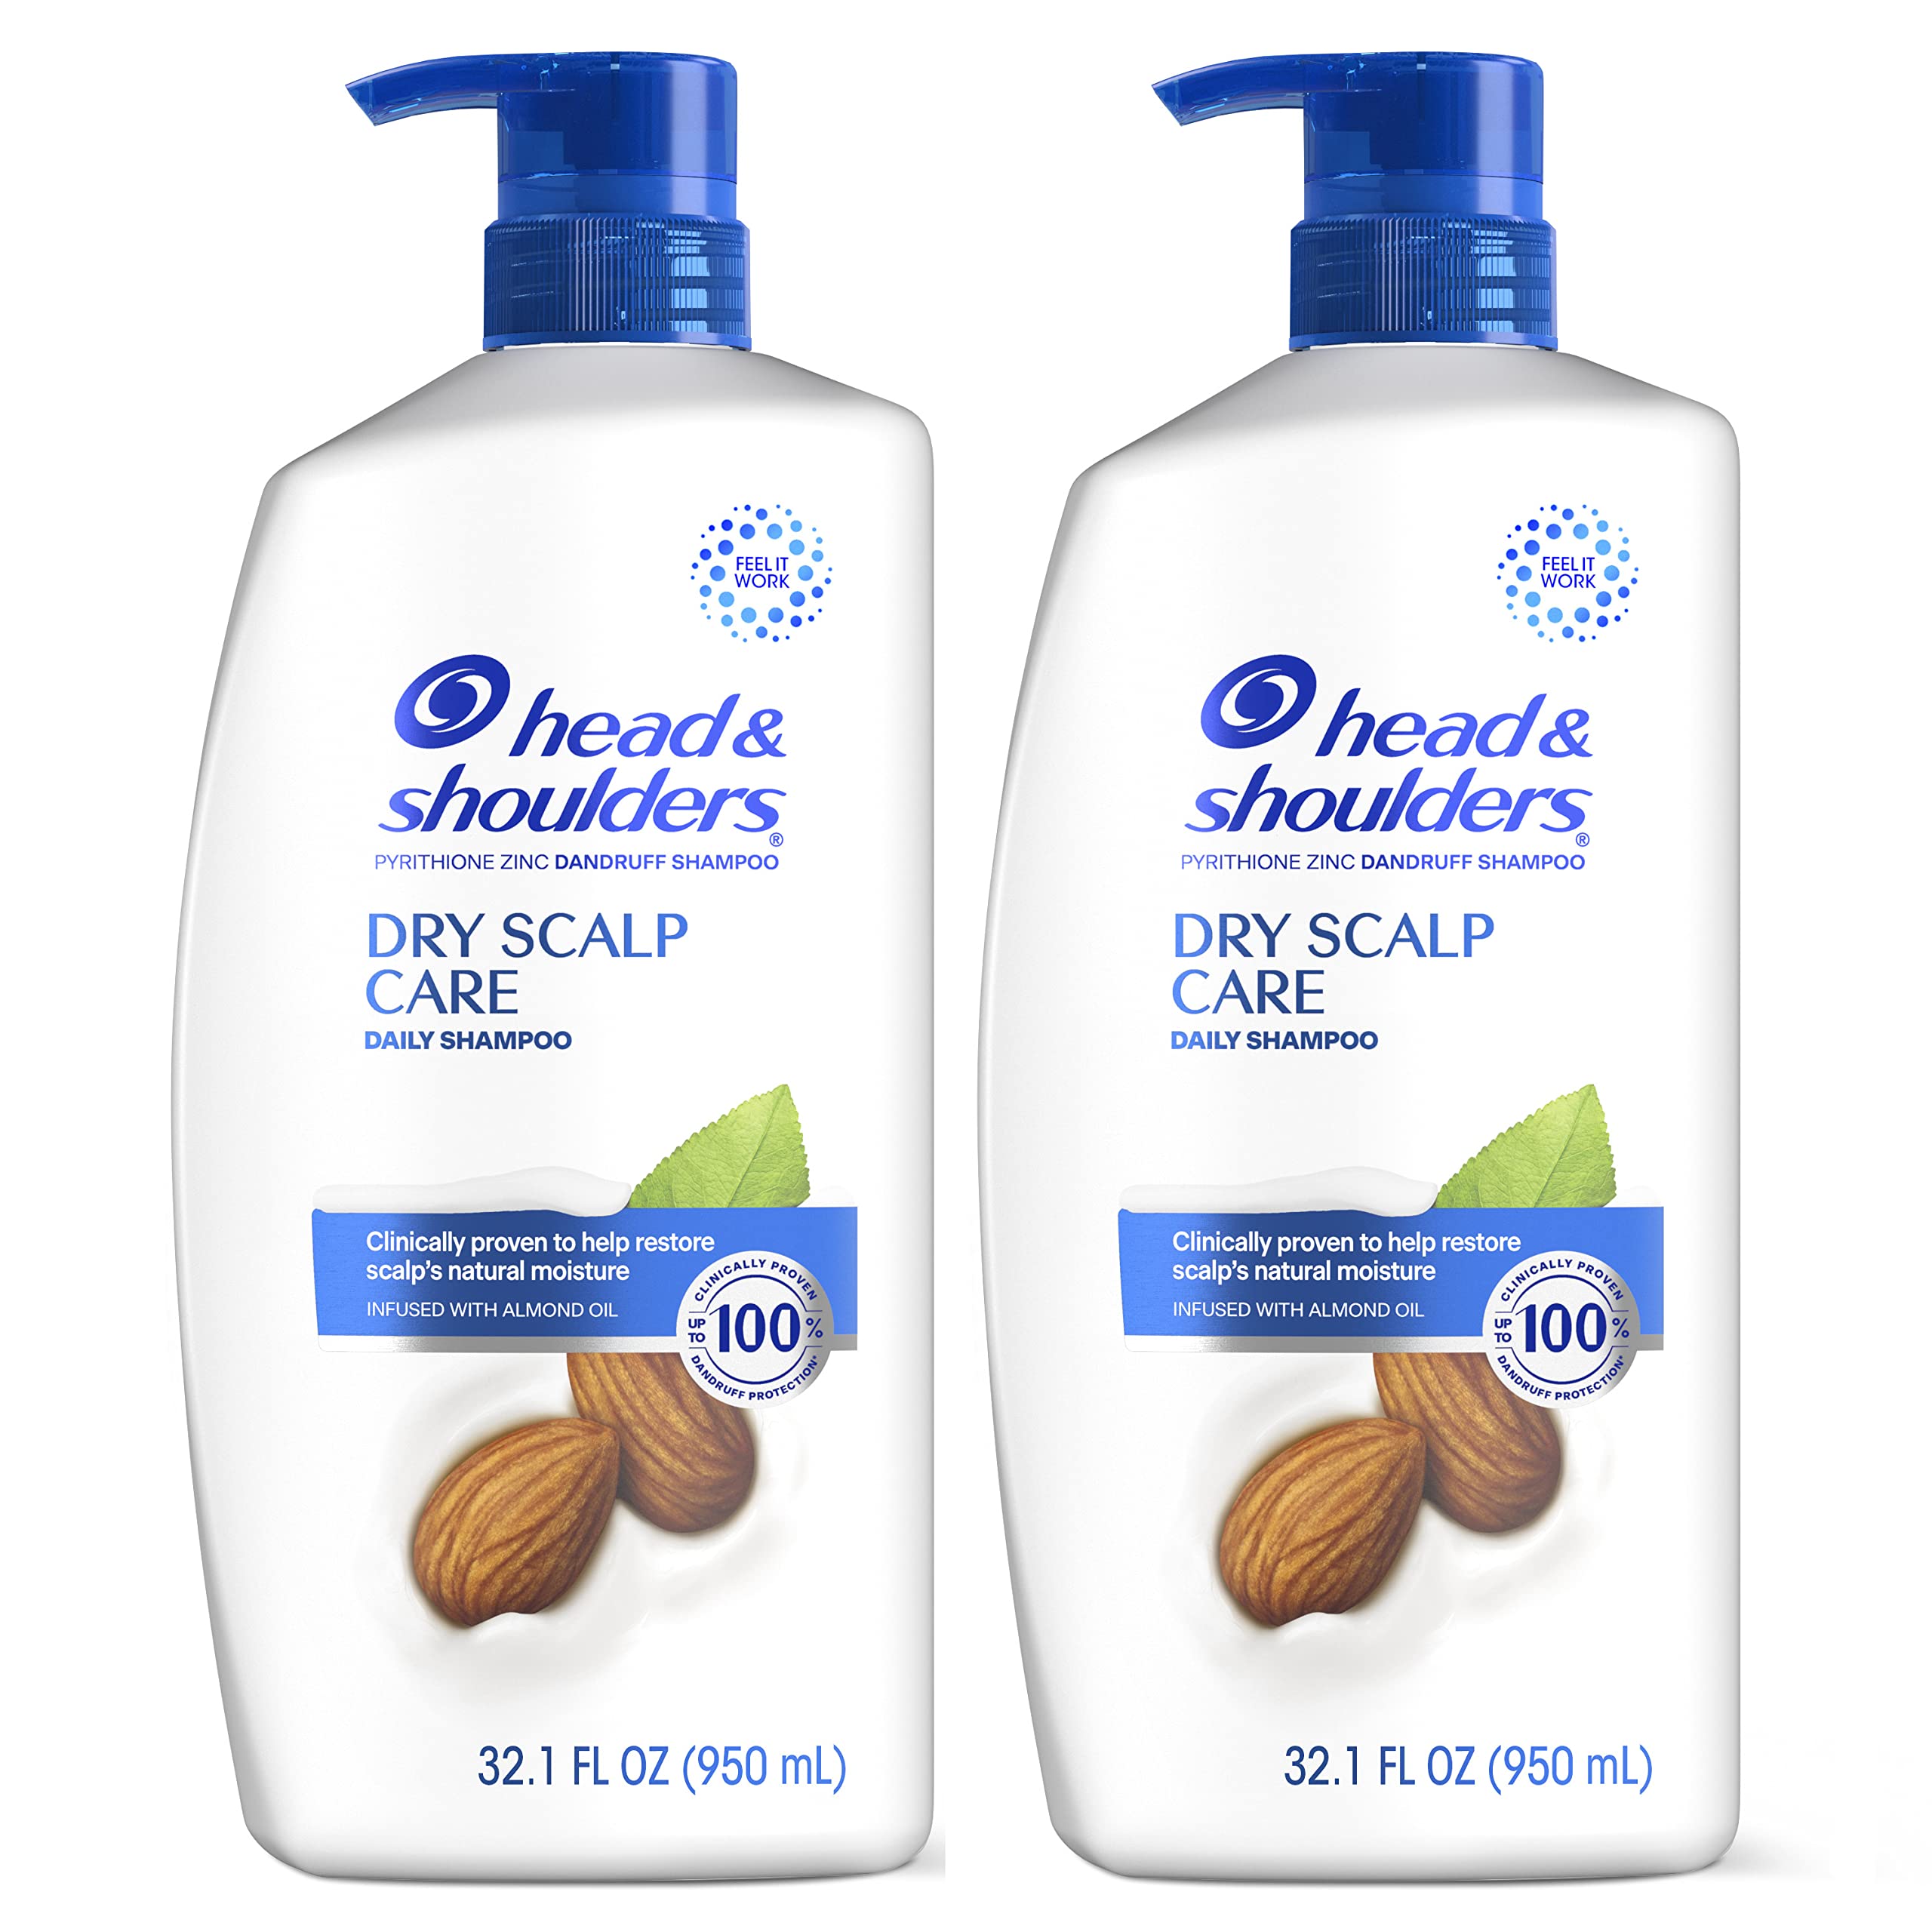 Head and Shoulders Shampoo, Daily-Use Anti-Dandruff Paraben Free Treatment, Dry Scalp Care with Almond Oil, 32.1 fl oz, Twin Pack (Packaging May Vary)